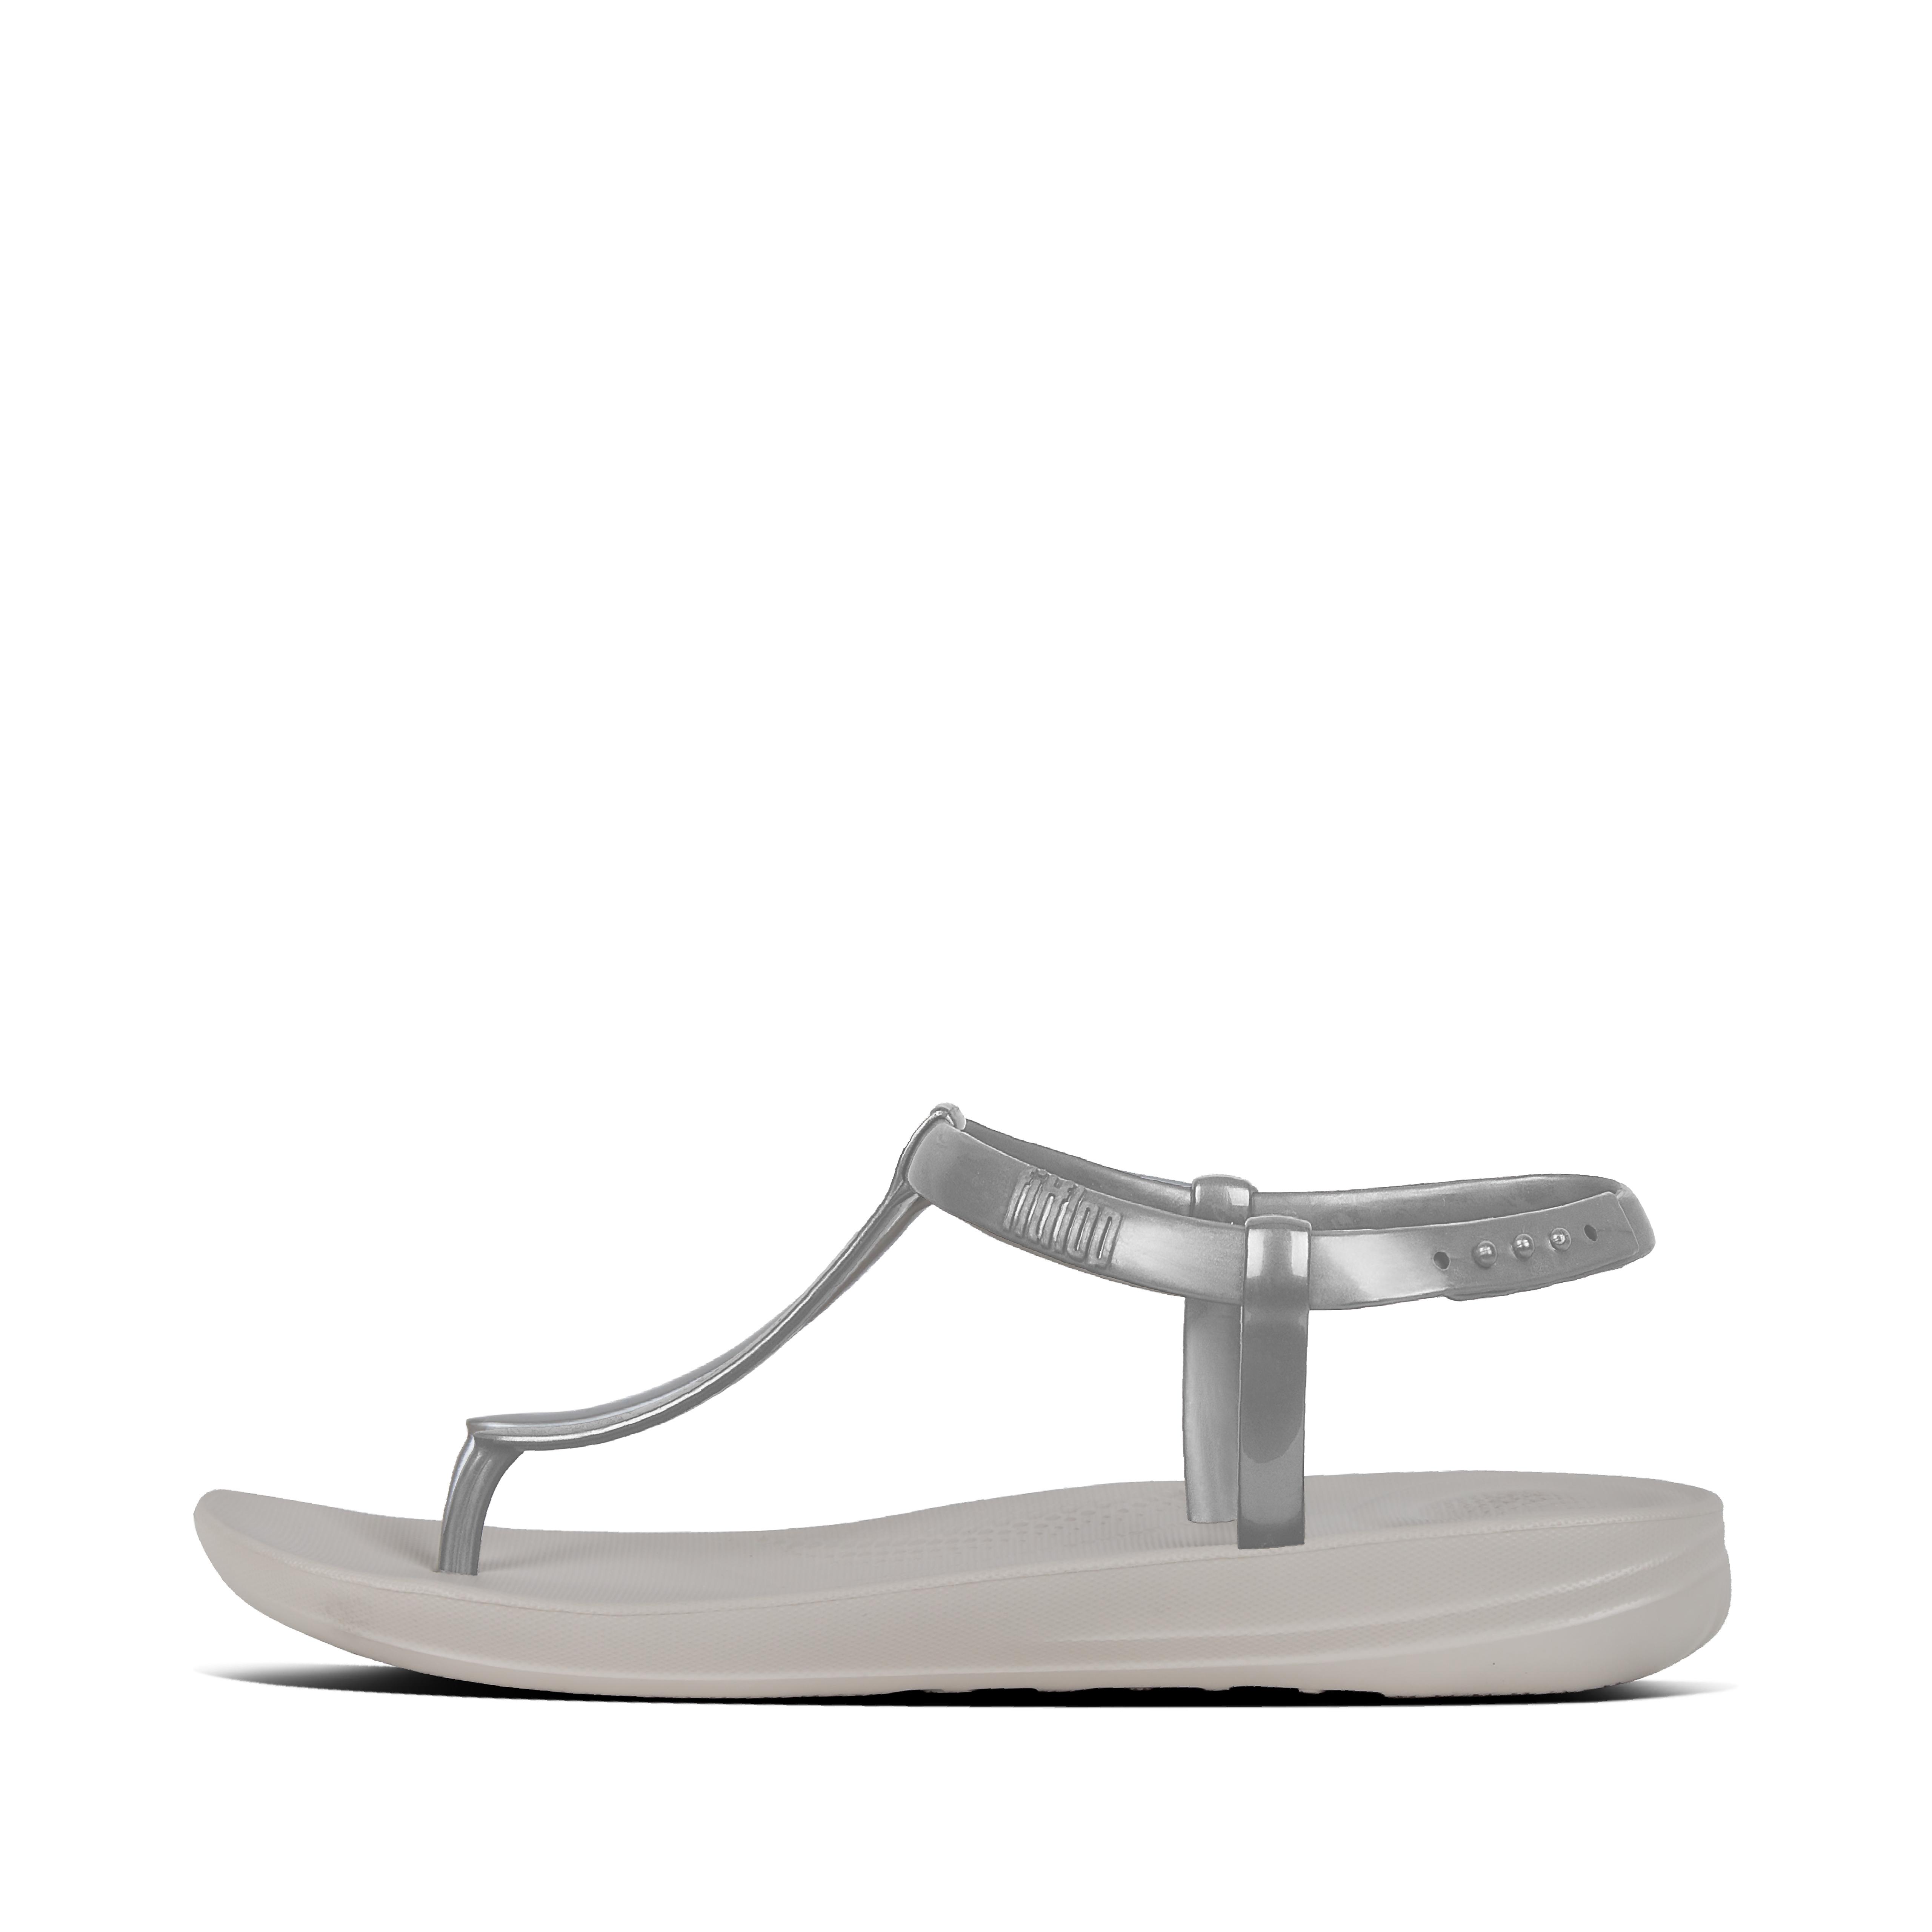 fitflop usa sale 2018